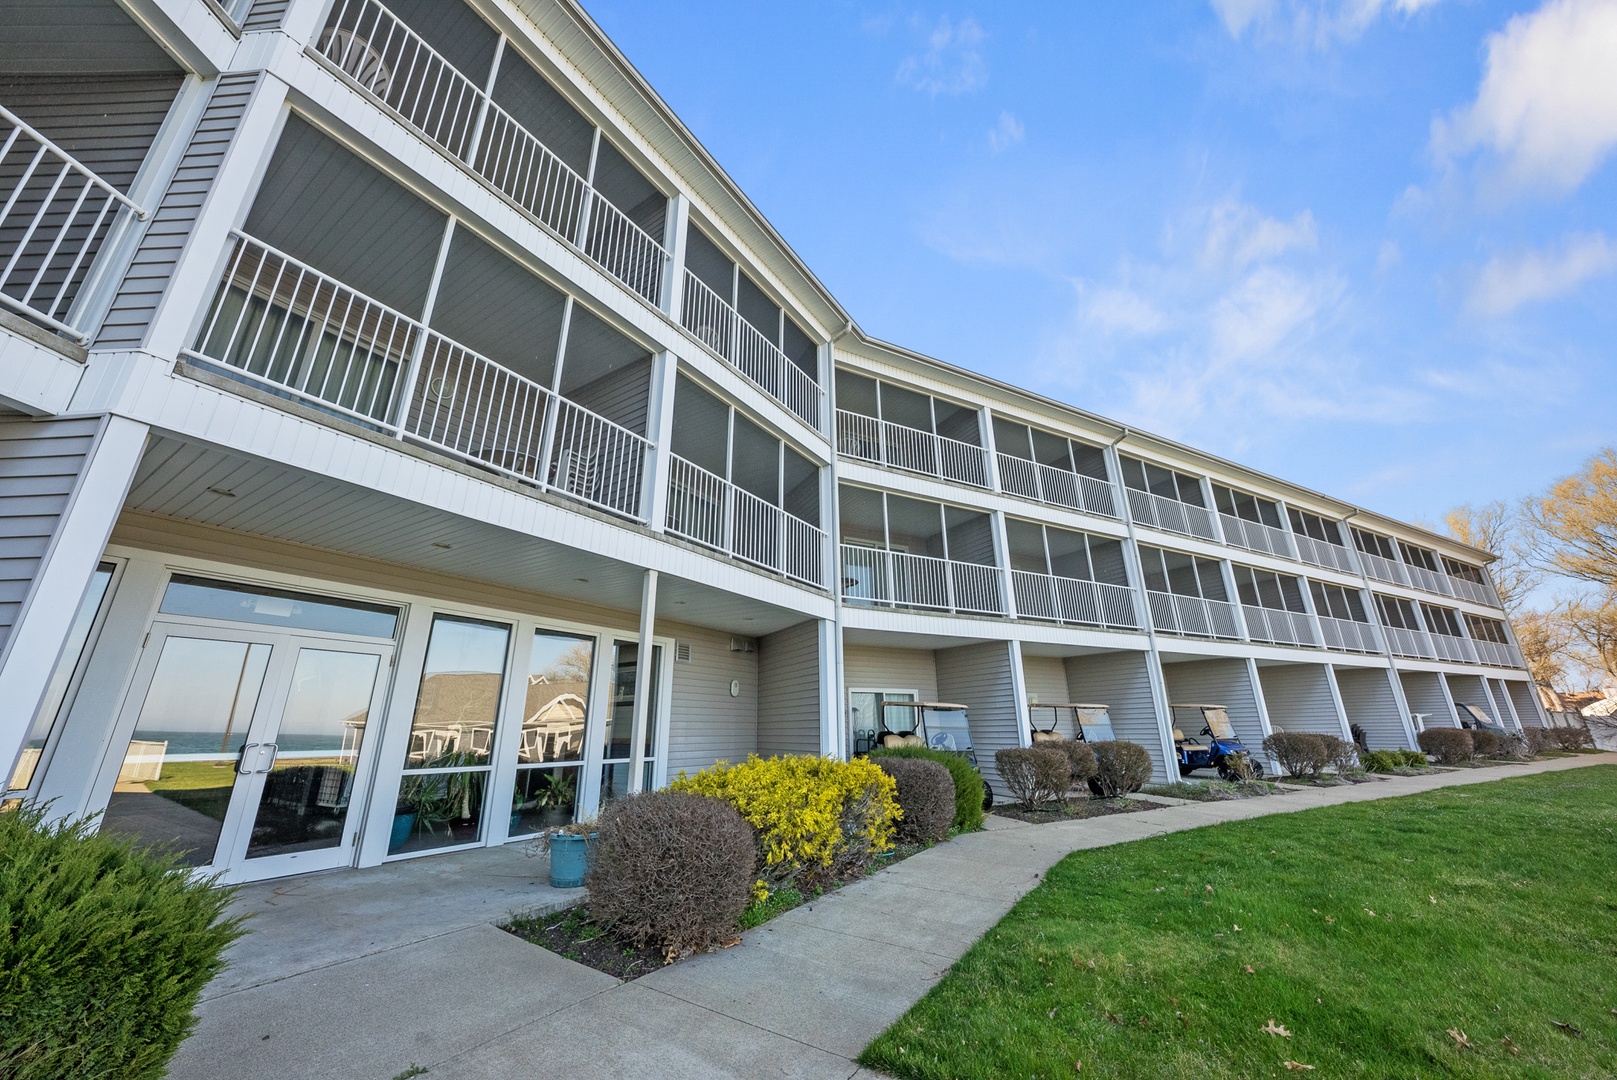 Find your perfect home away from home at Bayshore Resort on Put-in-Bay island